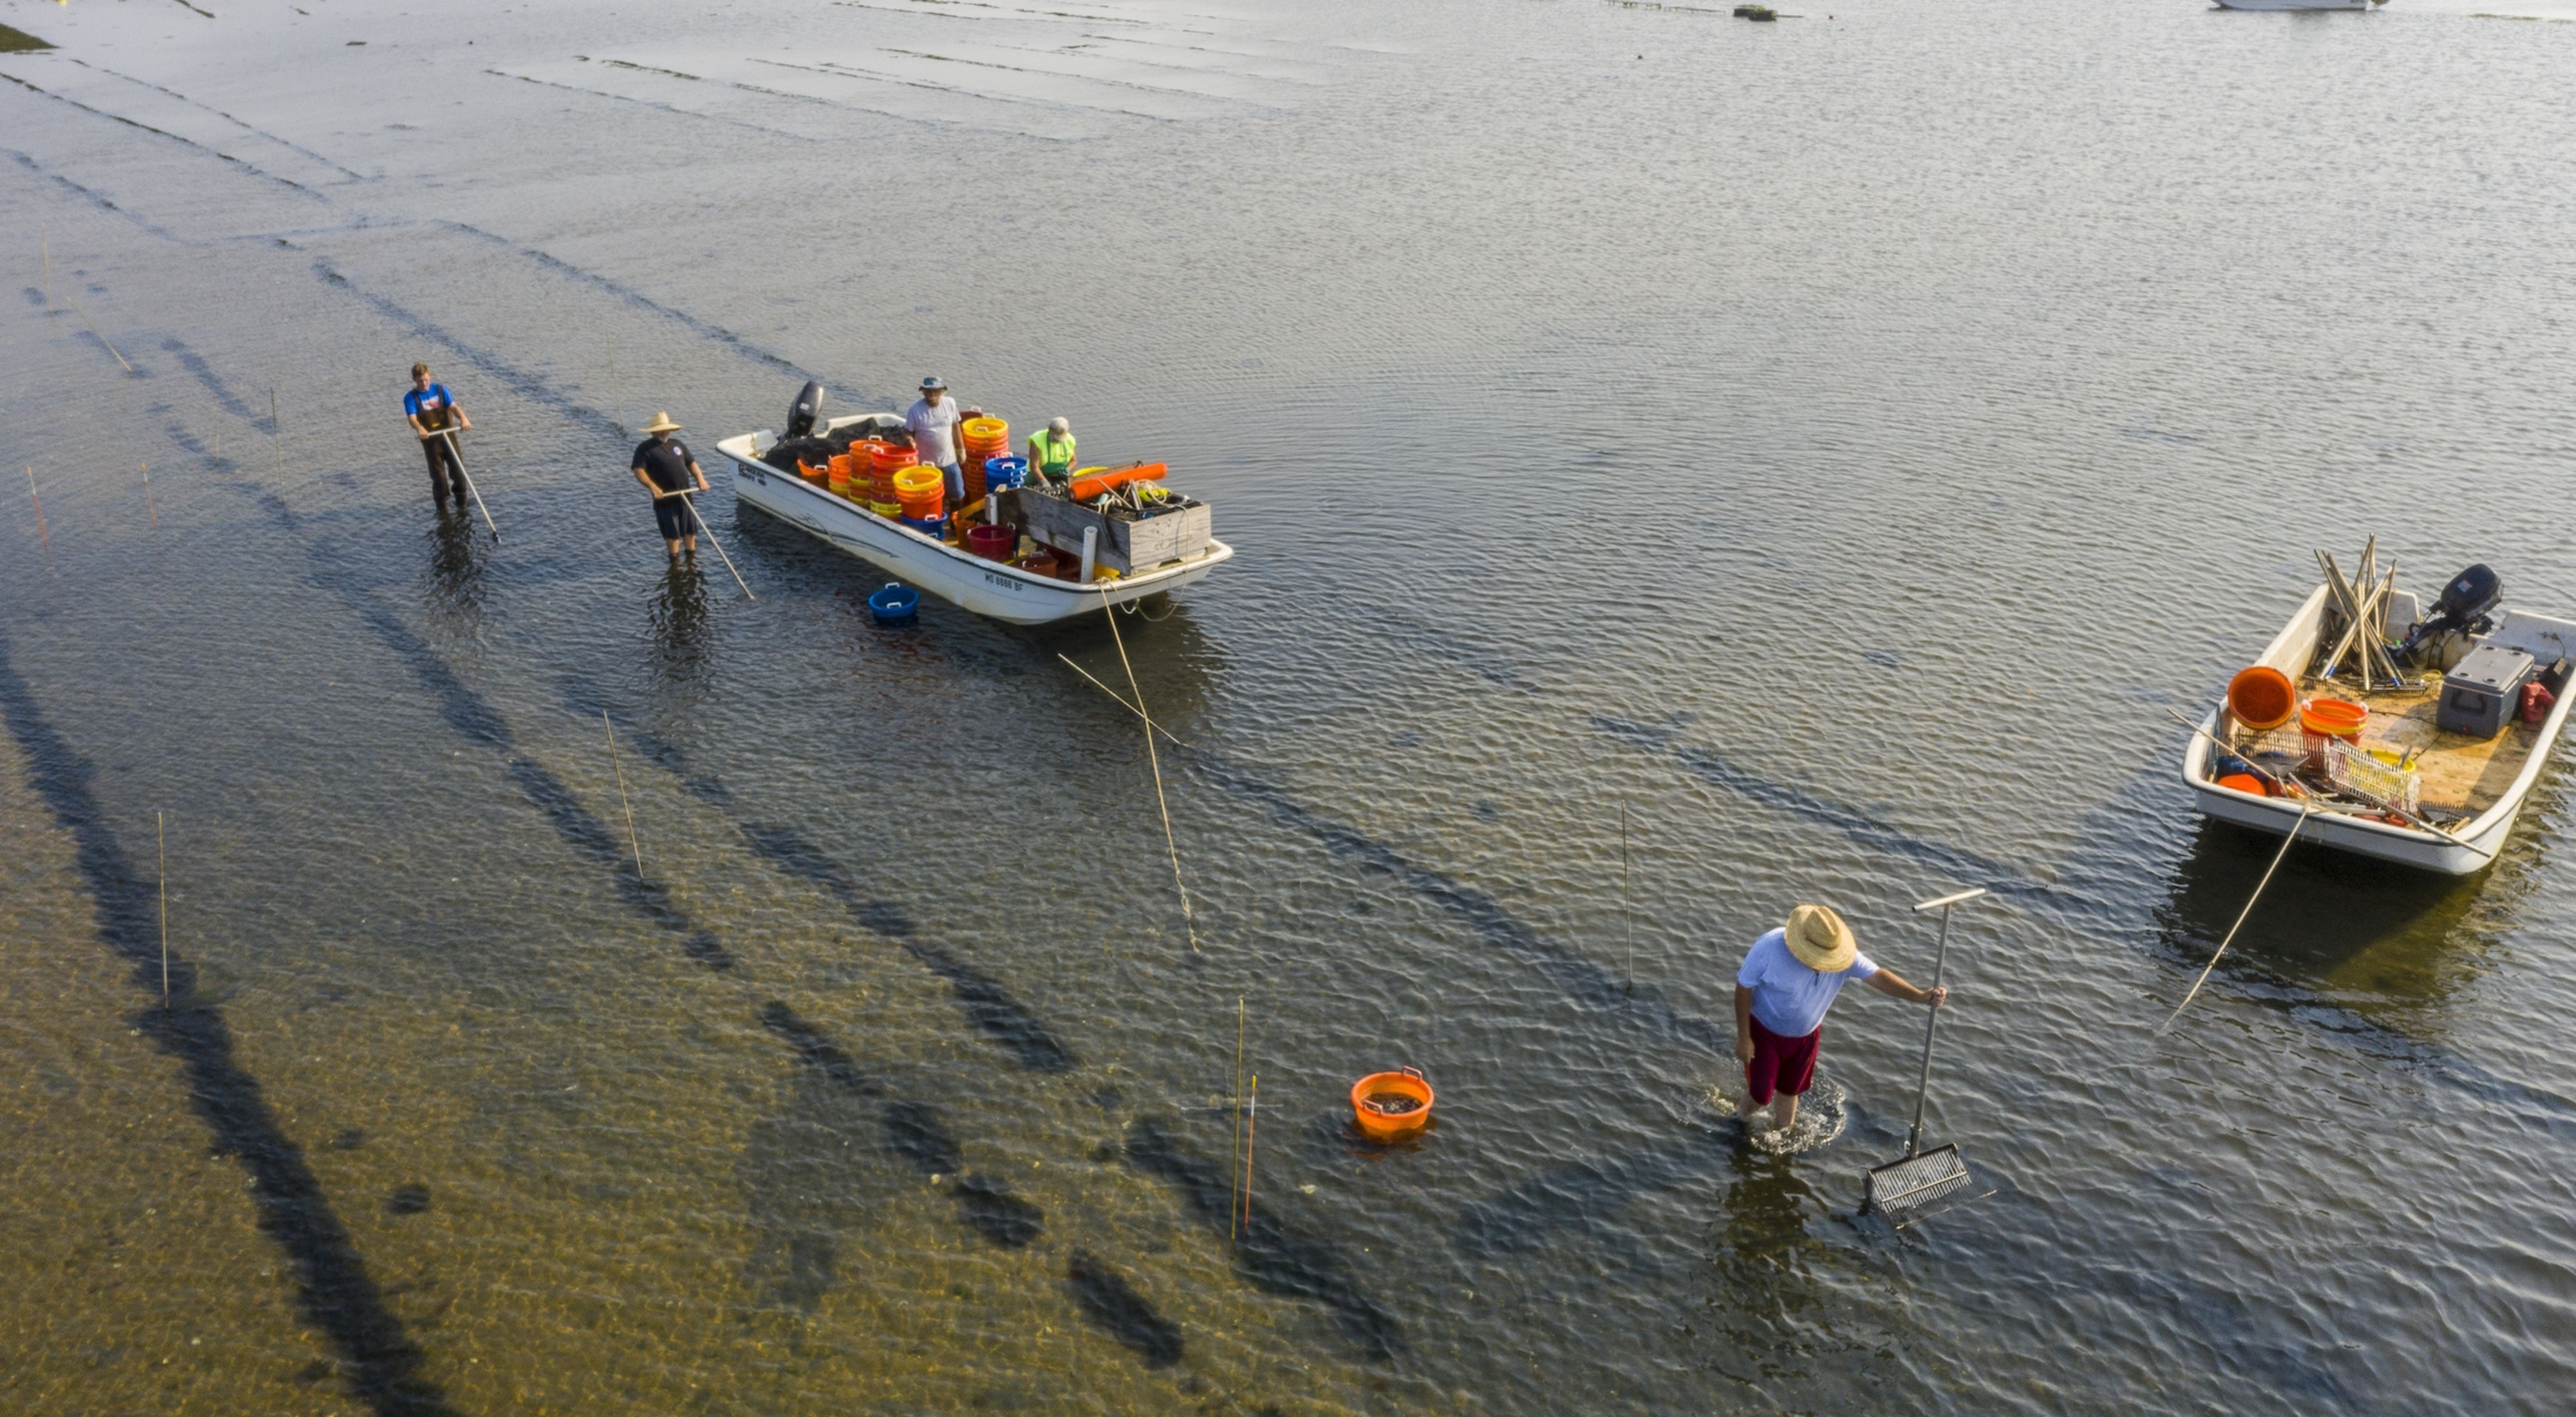 An aerial view of three people wading ankle deep in water, harvesting oysters from the ocean floor.